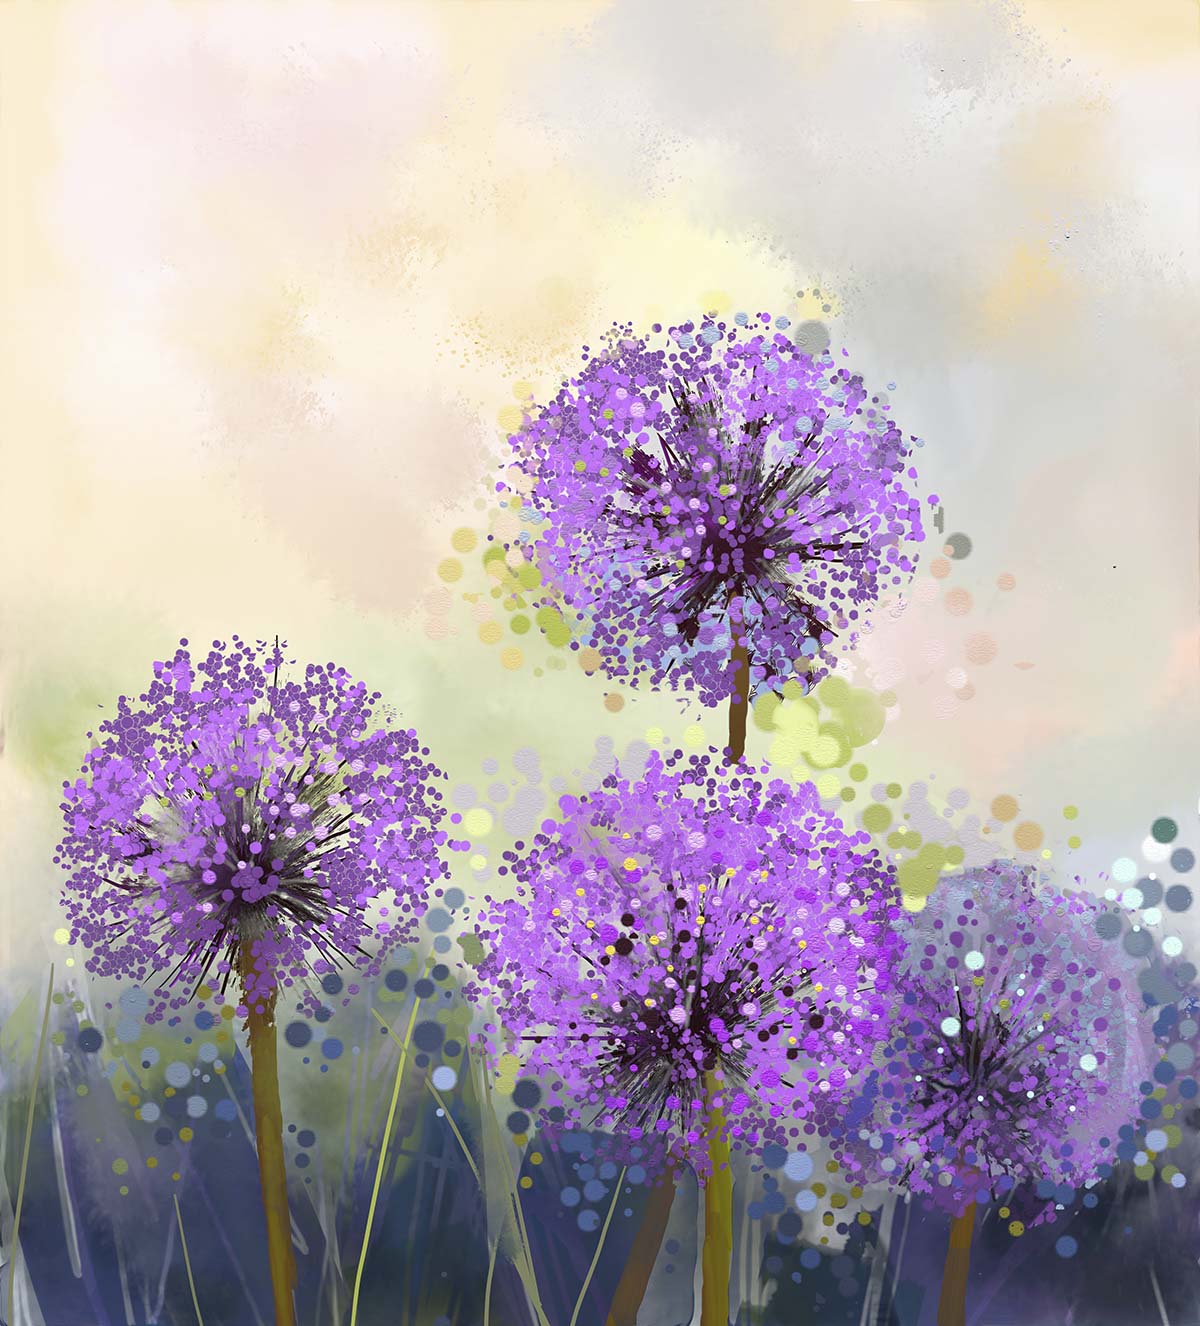 A group of purple flowers